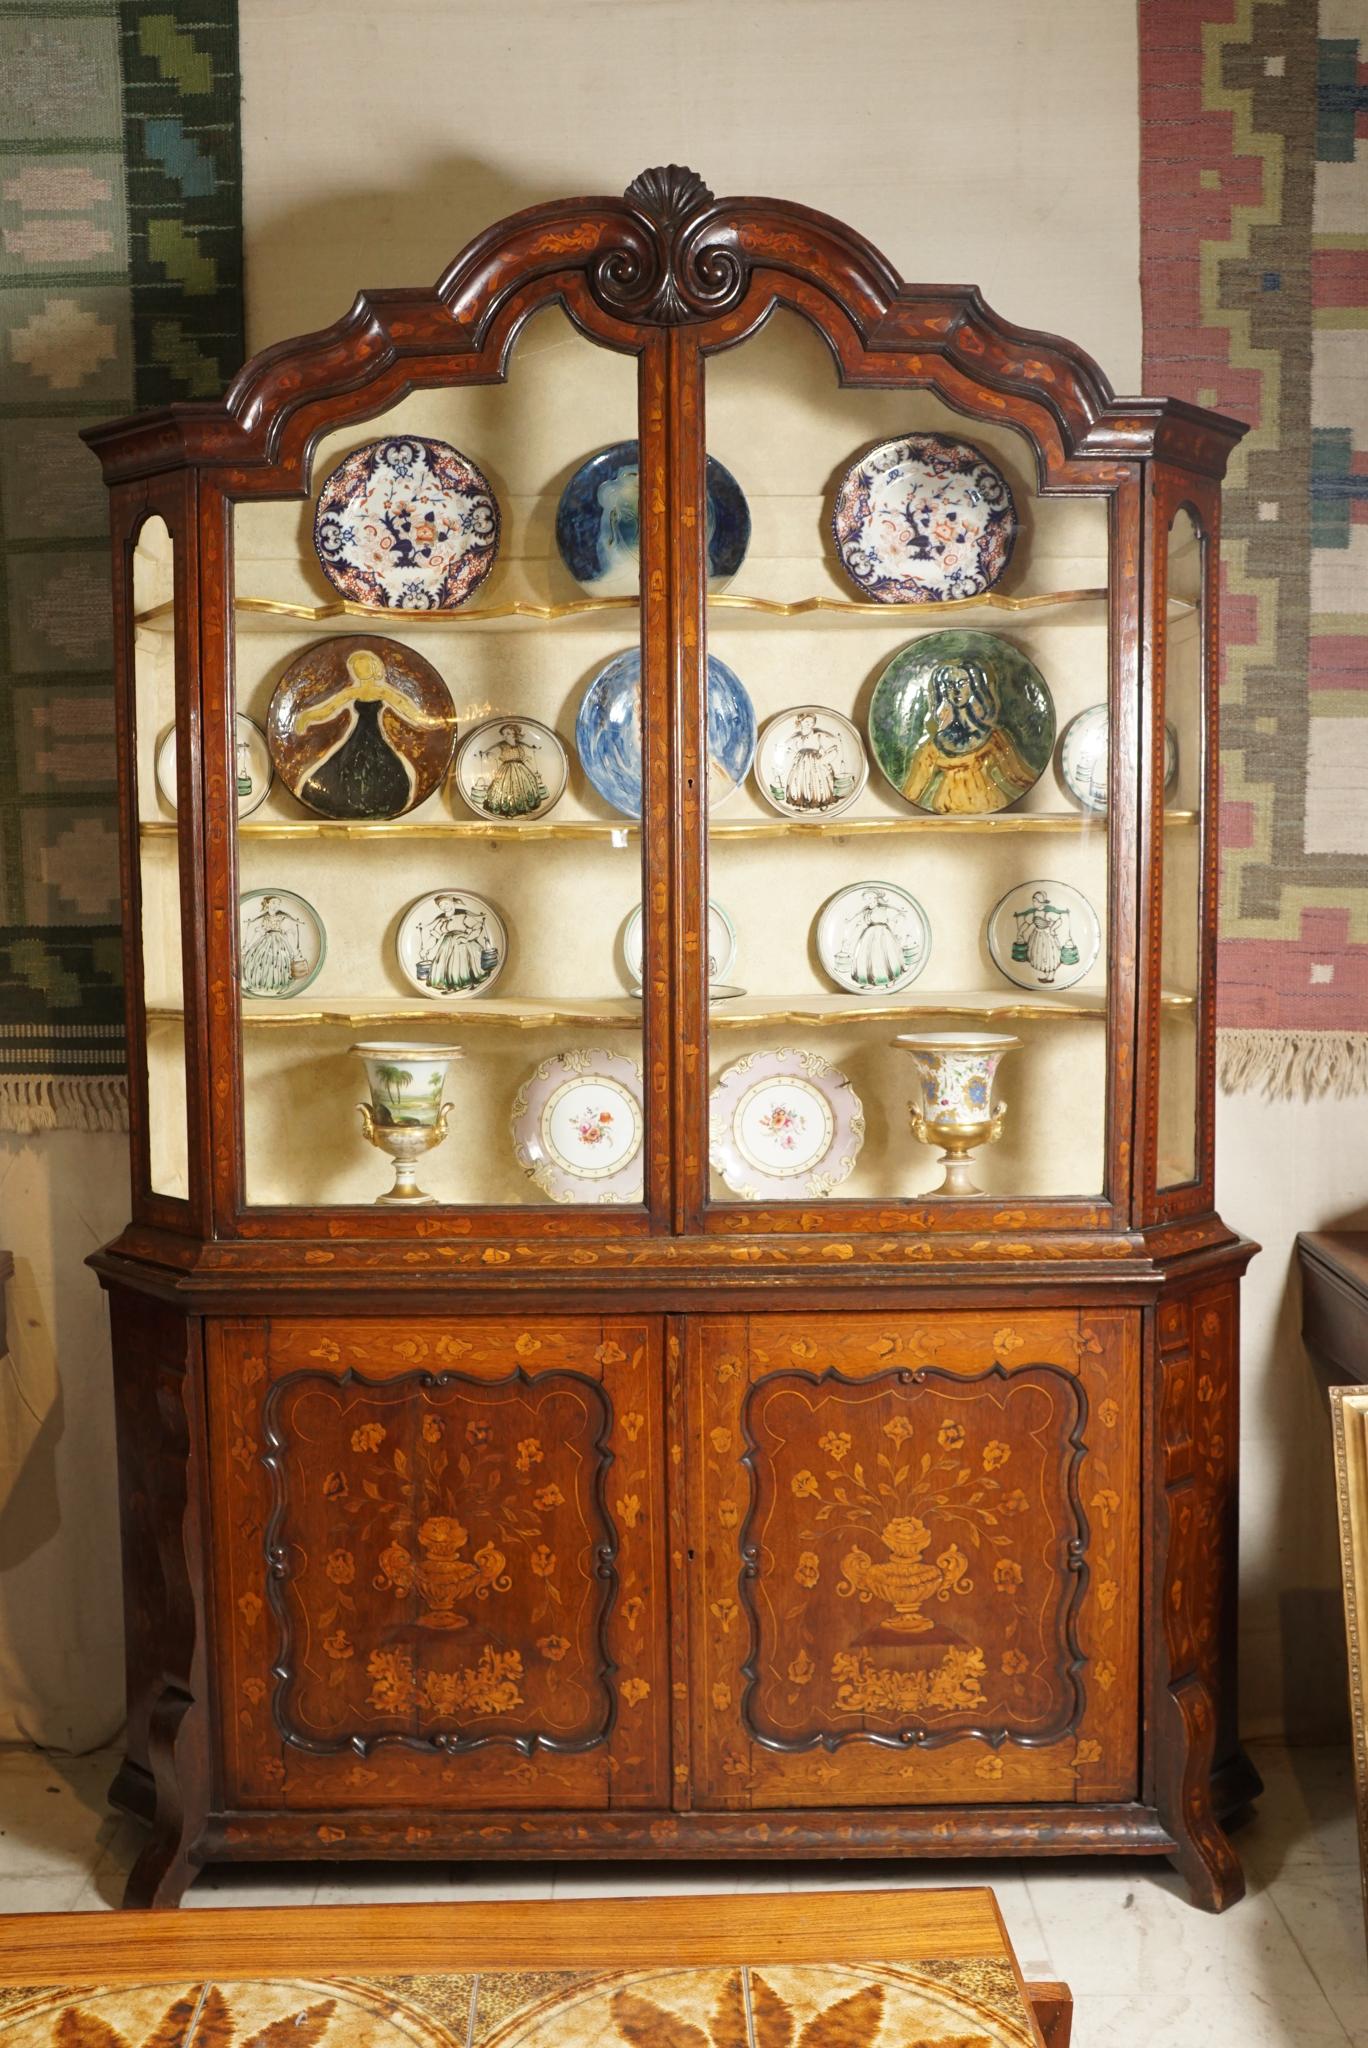 Dutch 18th century Rococo buffet or bookcase inlaid overall with floral marquetry. The buffet or bookcase with shaped, molded double scroll shell cornice over a glass fitted interior fitted with three shelves with gilded shaped fronts. The lower